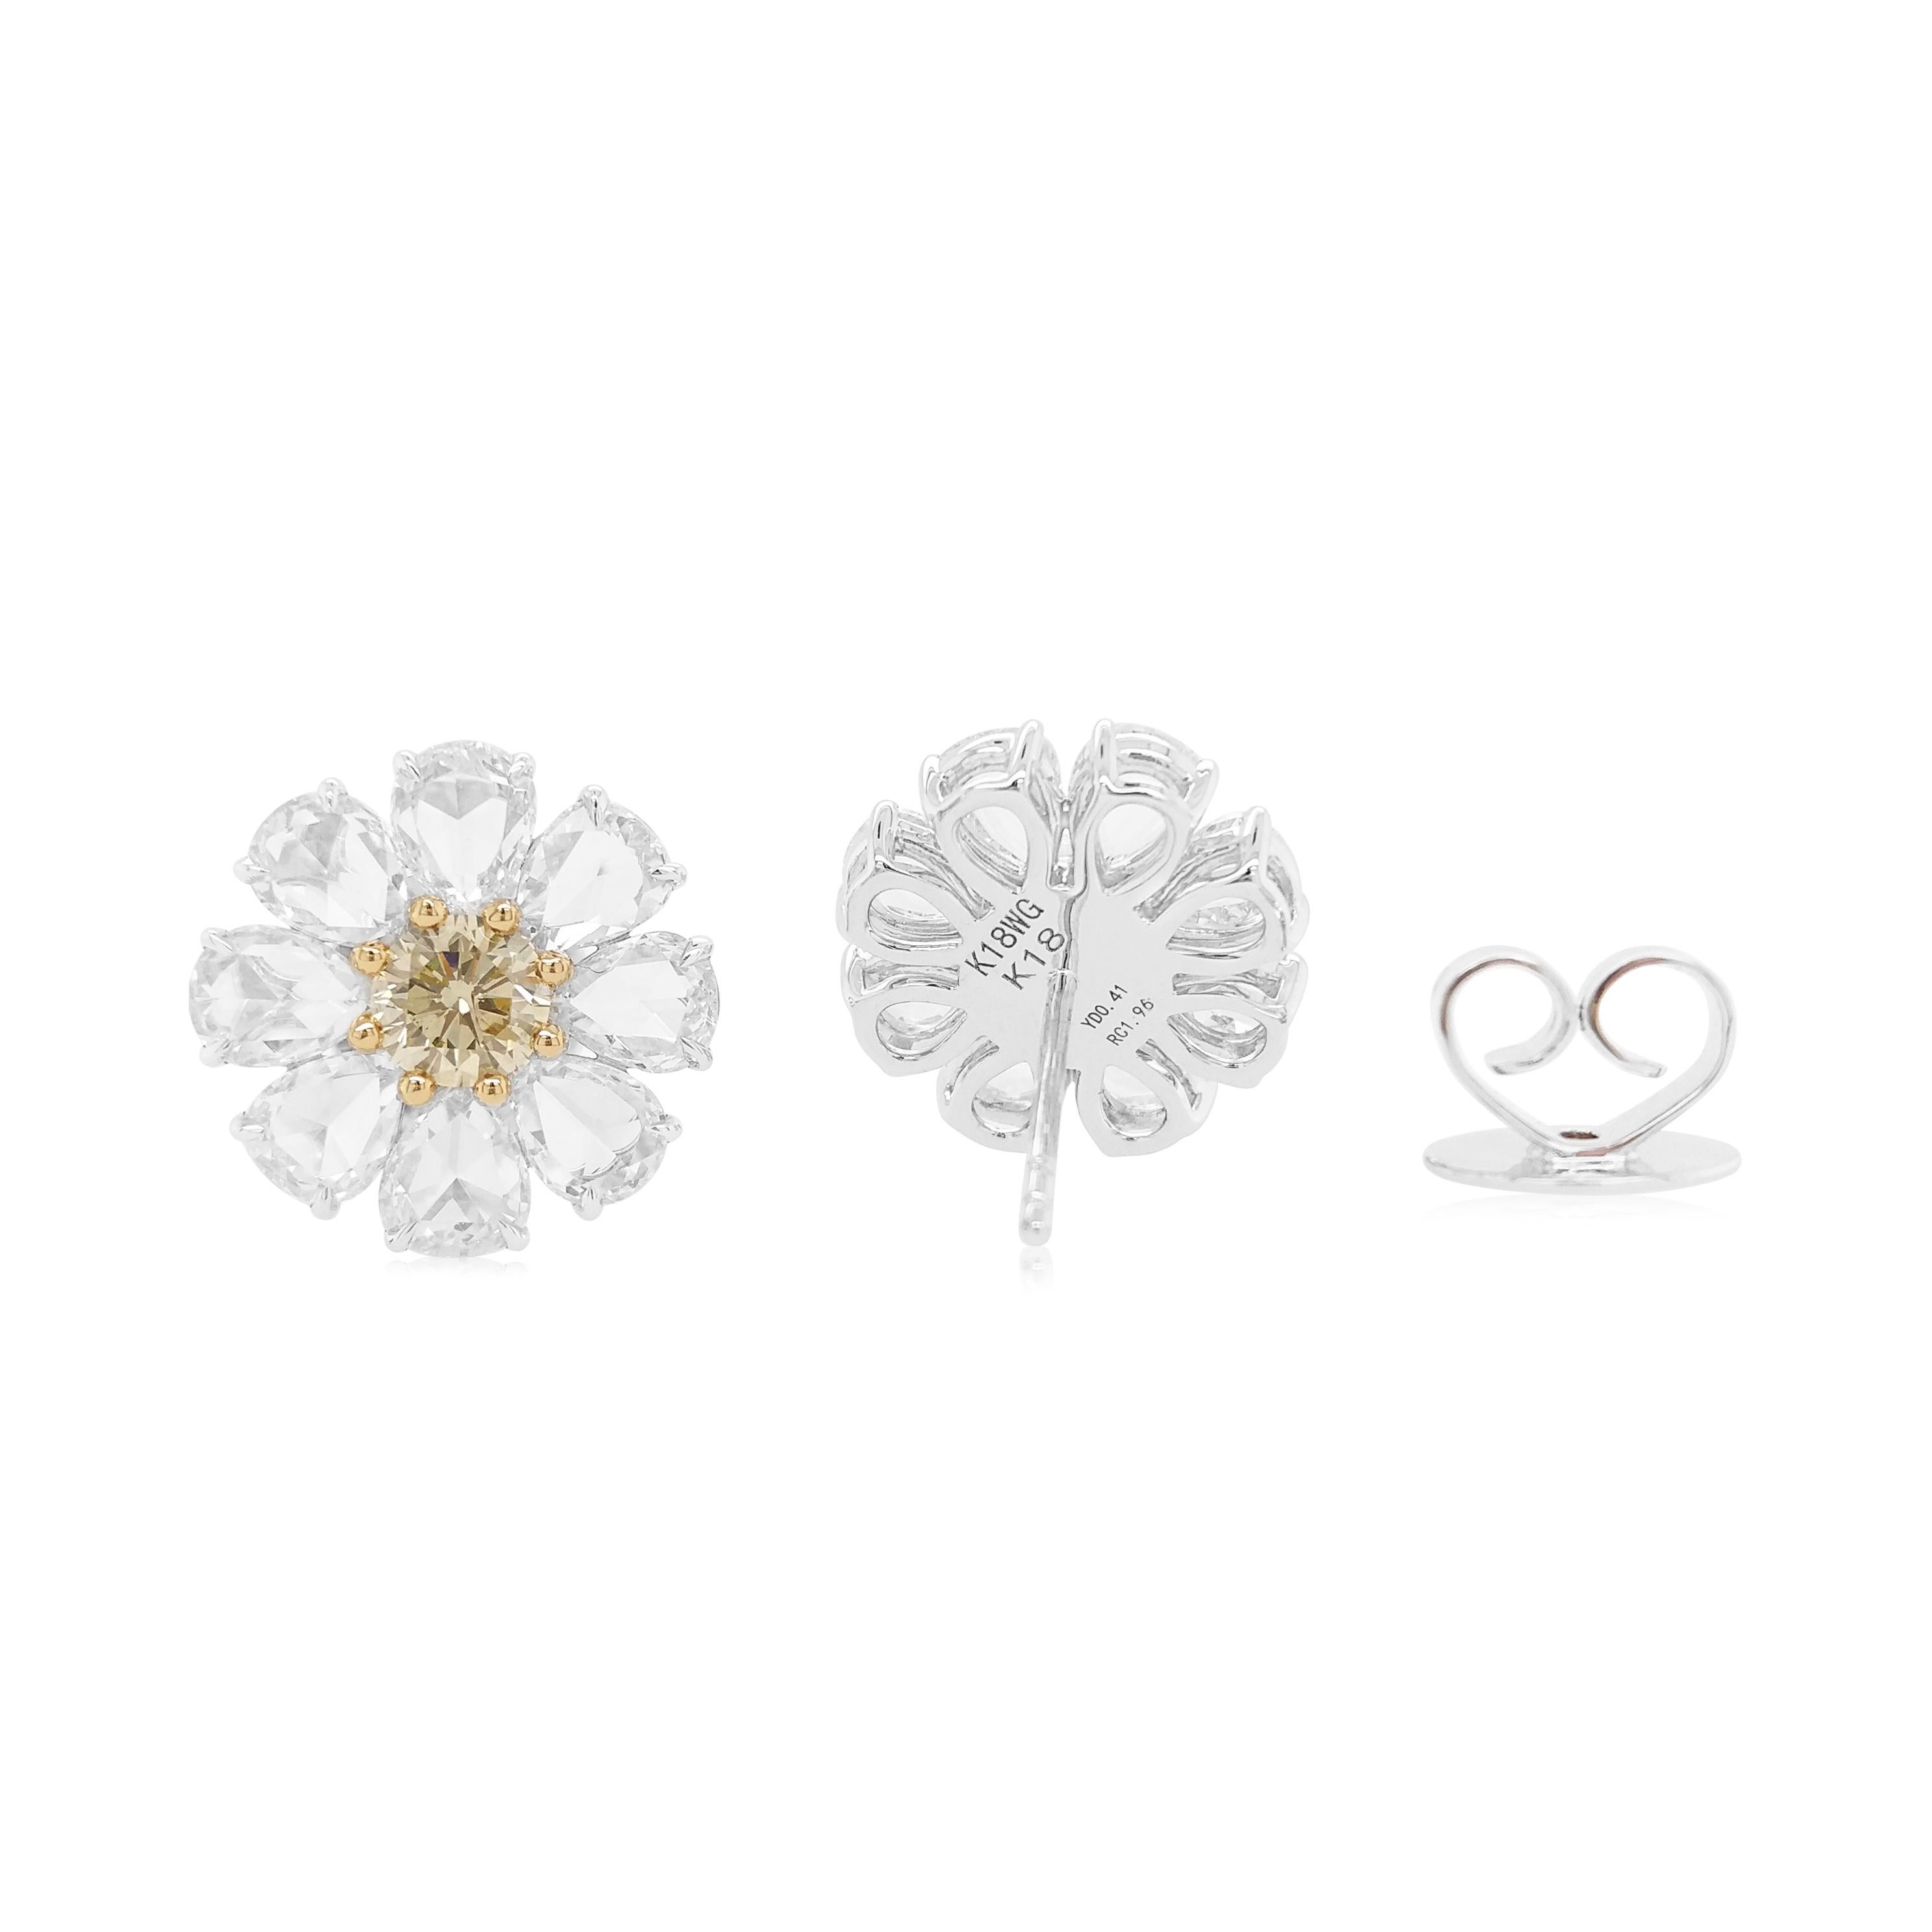 IGI Certified Fancy Yellow Diamond 18K Gold Floral Earrings
Presenting just the right kind of jewelry for this summer season inspired by blooming flowers. Each earring features a central Yellow diamond surrounded by White diamonds to create a